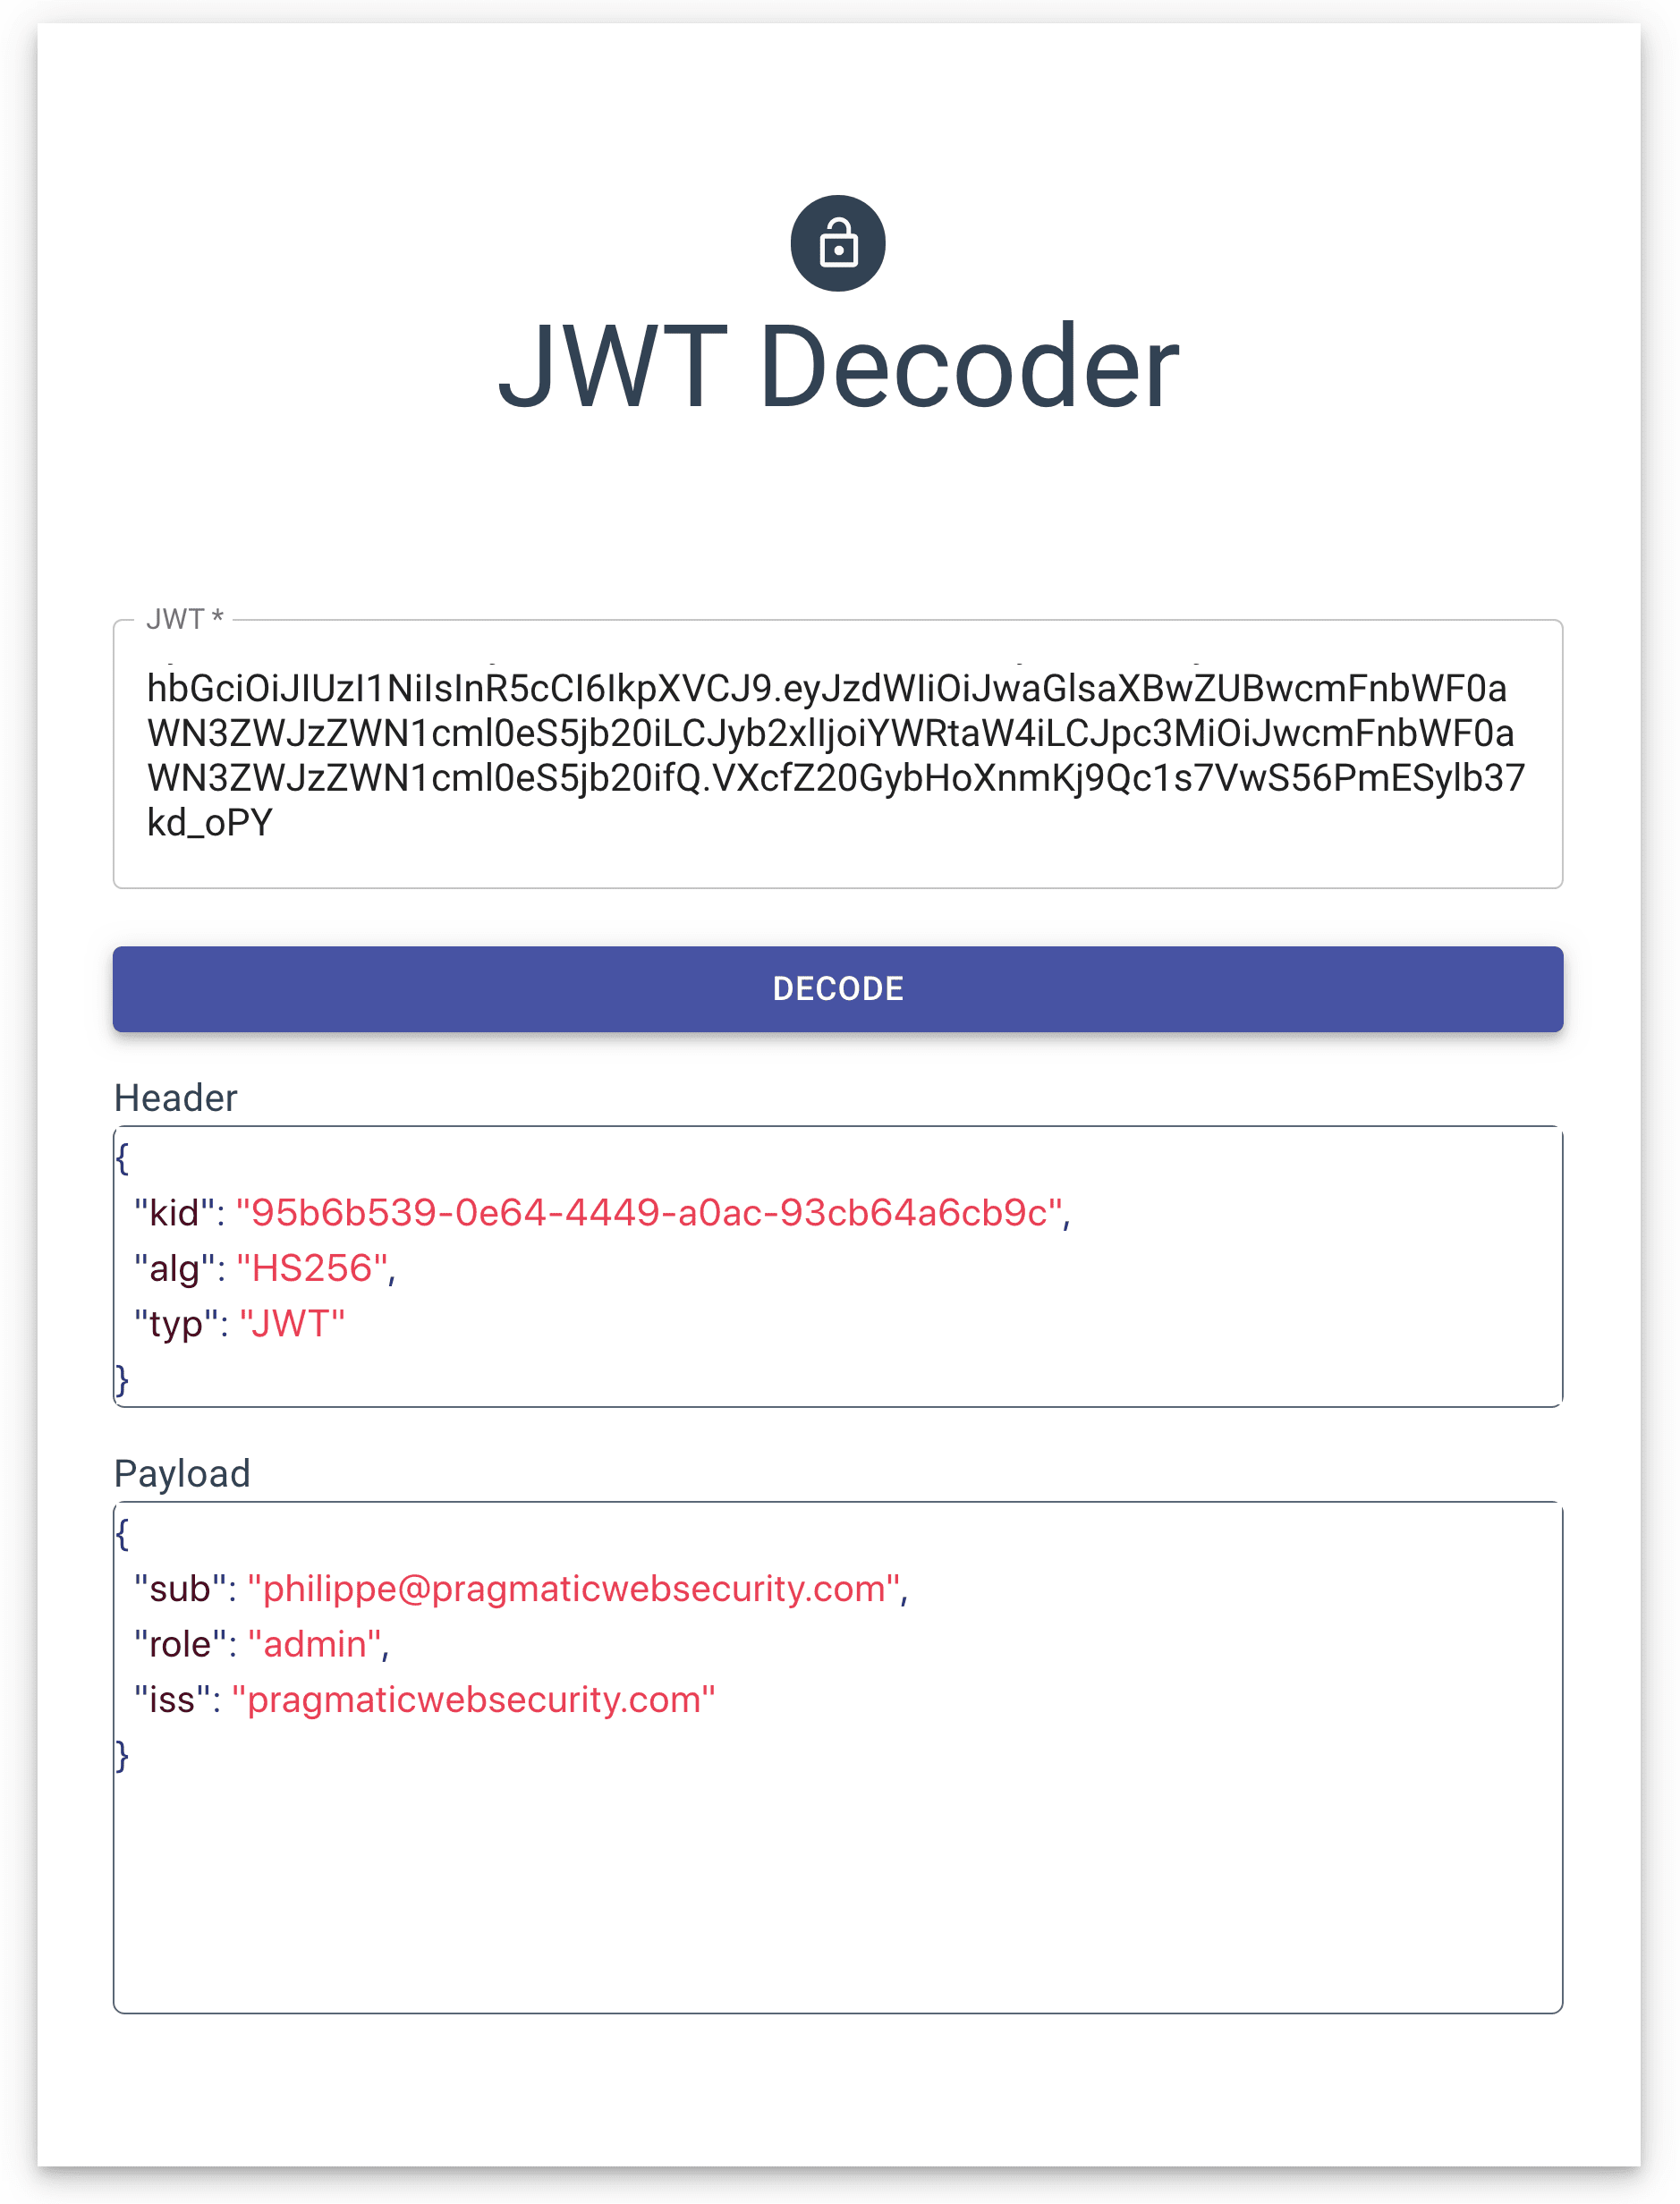 The Parts of JWT Talks About | Ping Identity